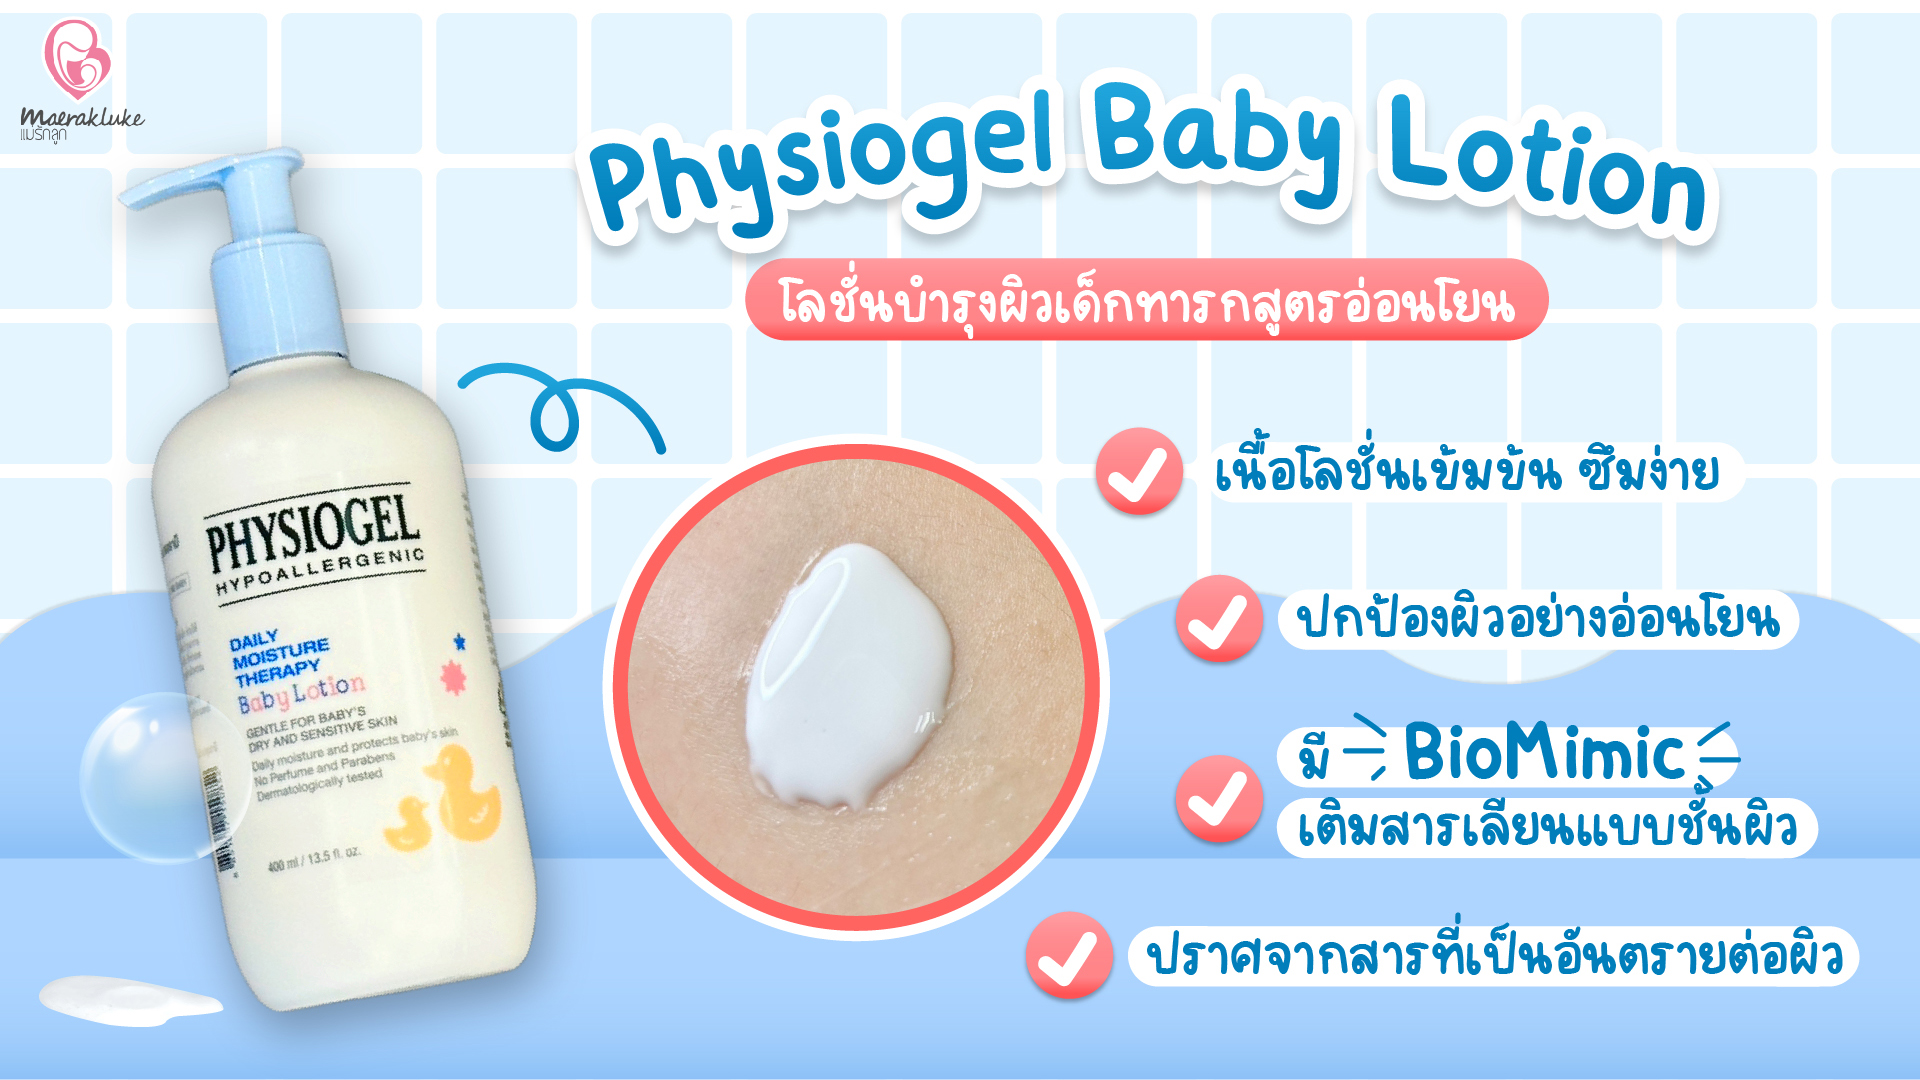 Physiogel Baby Lotion